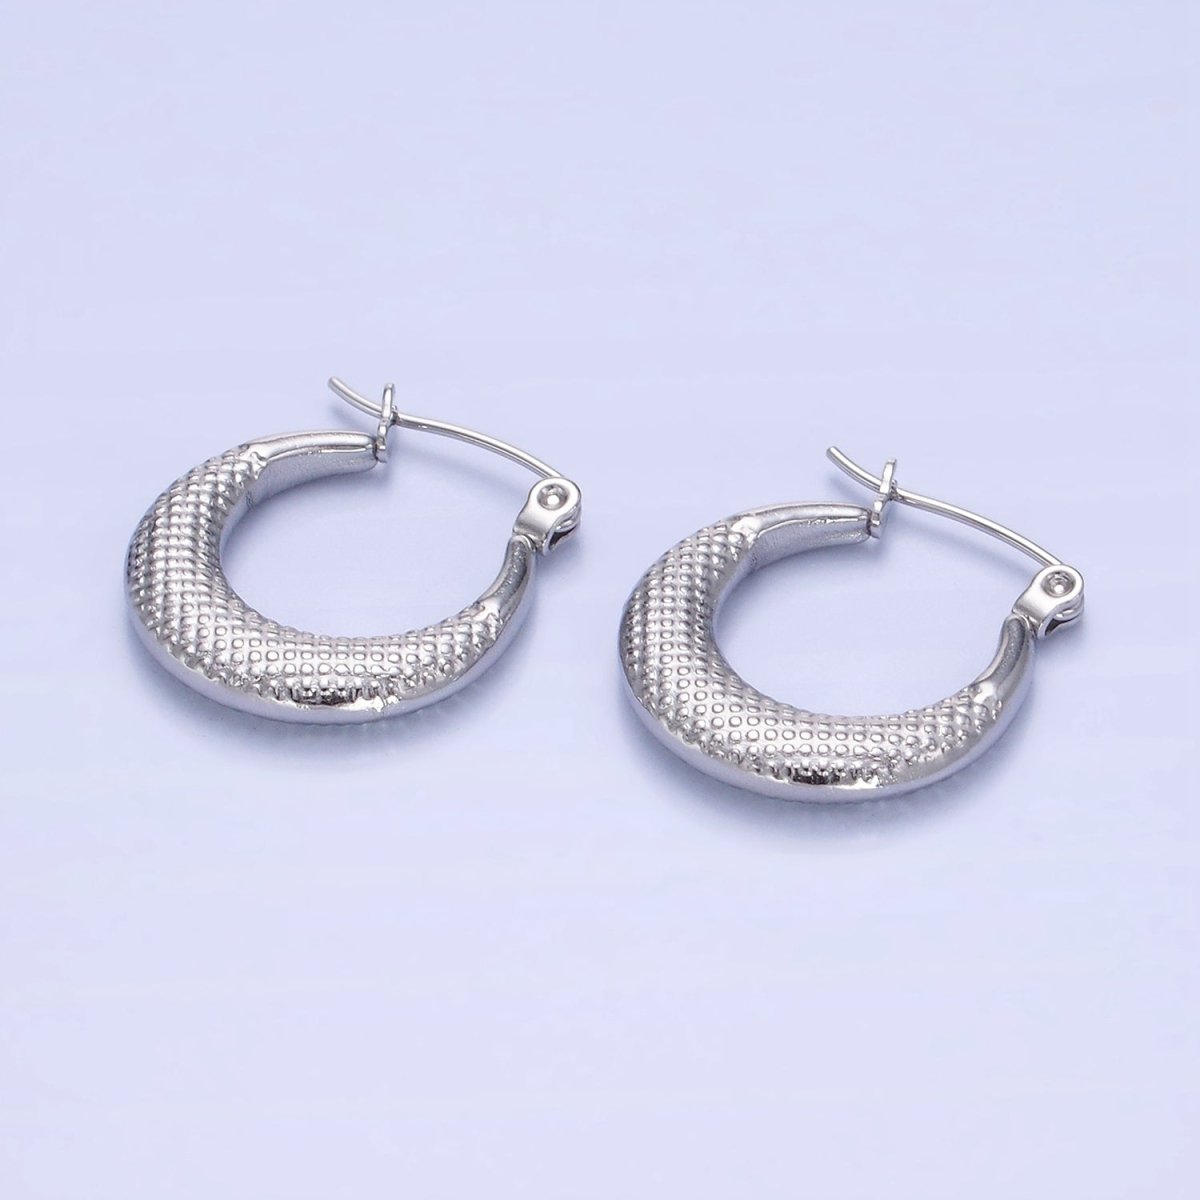 Stainless Steel 20mm Dotted Textured Latch Hoop Earrings in Gold & Silver | AB1388 AB1389 - DLUXCA